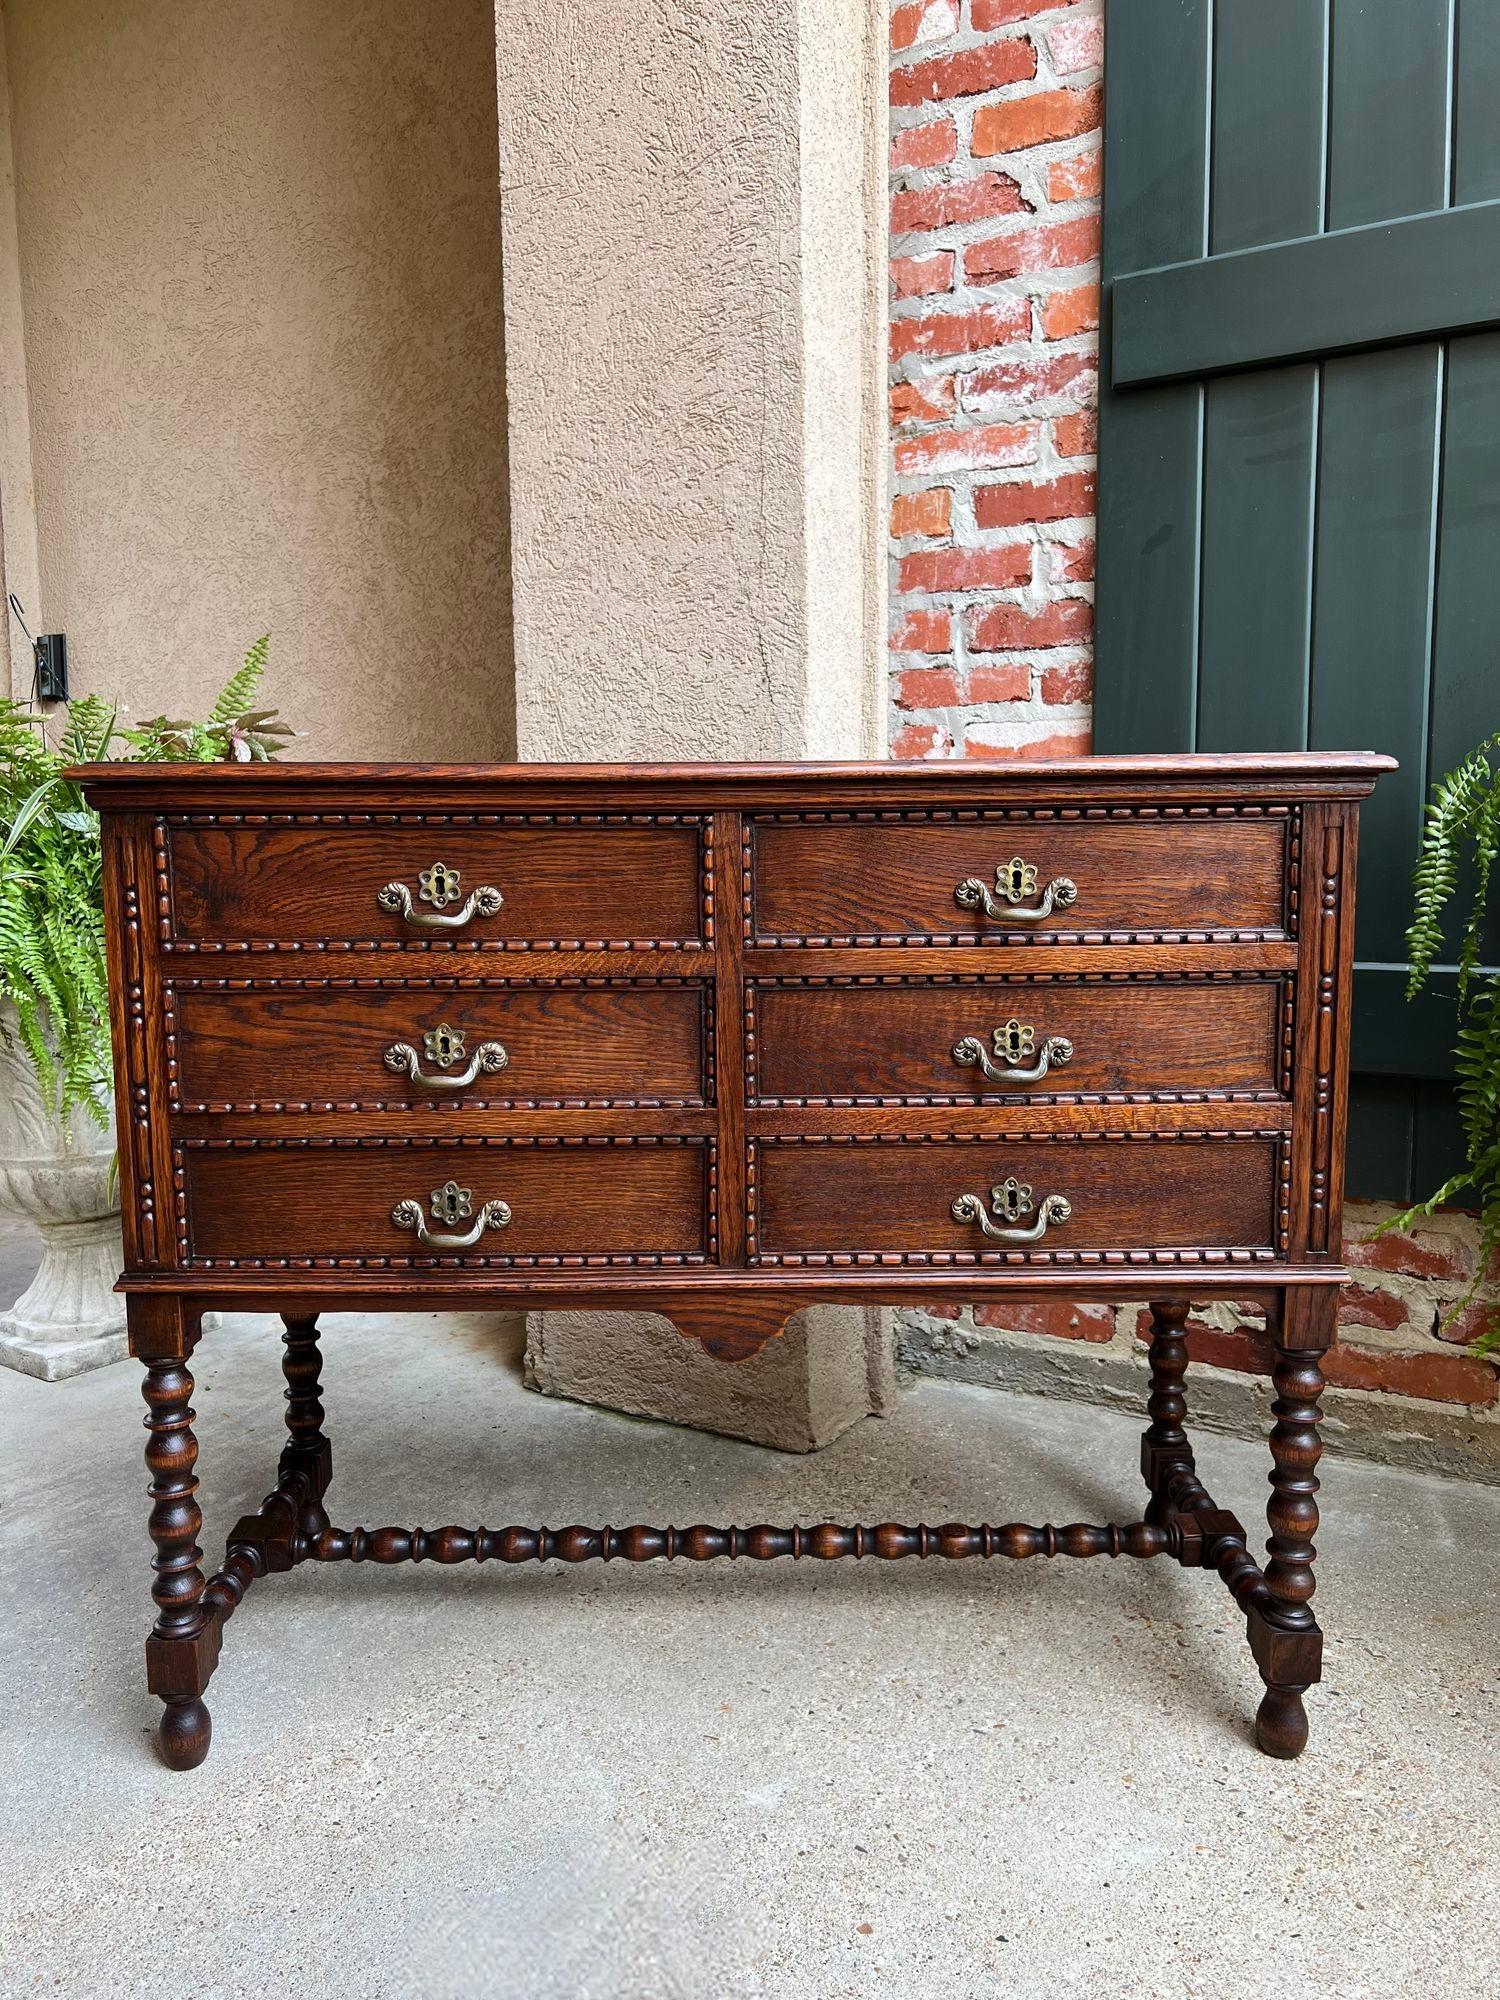 Antique English Hall Table Chest Sideboard Cabinet Jacobean Carved Oak Bobbin.

Direct from England, a beautiful antique 6 drawer hall table in lovely Jacobean style!  Six large drawers, all having large beaded trim edges with heavy brass handles